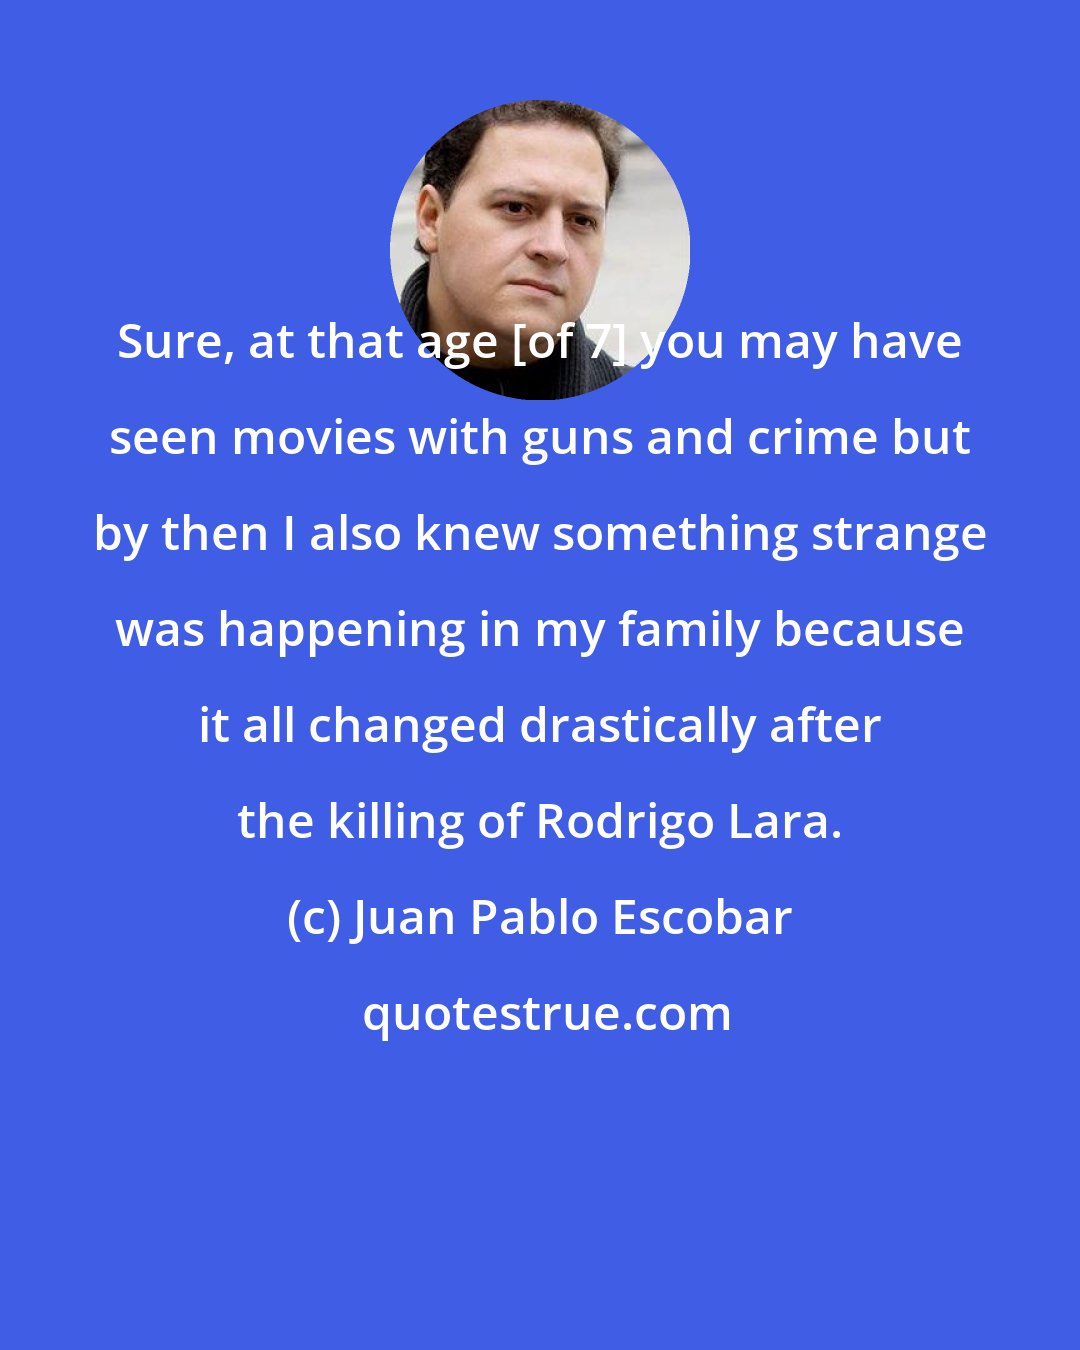 Juan Pablo Escobar: Sure, at that age [of 7] you may have seen movies with guns and crime but by then I also knew something strange was happening in my family because it all changed drastically after the killing of Rodrigo Lara.